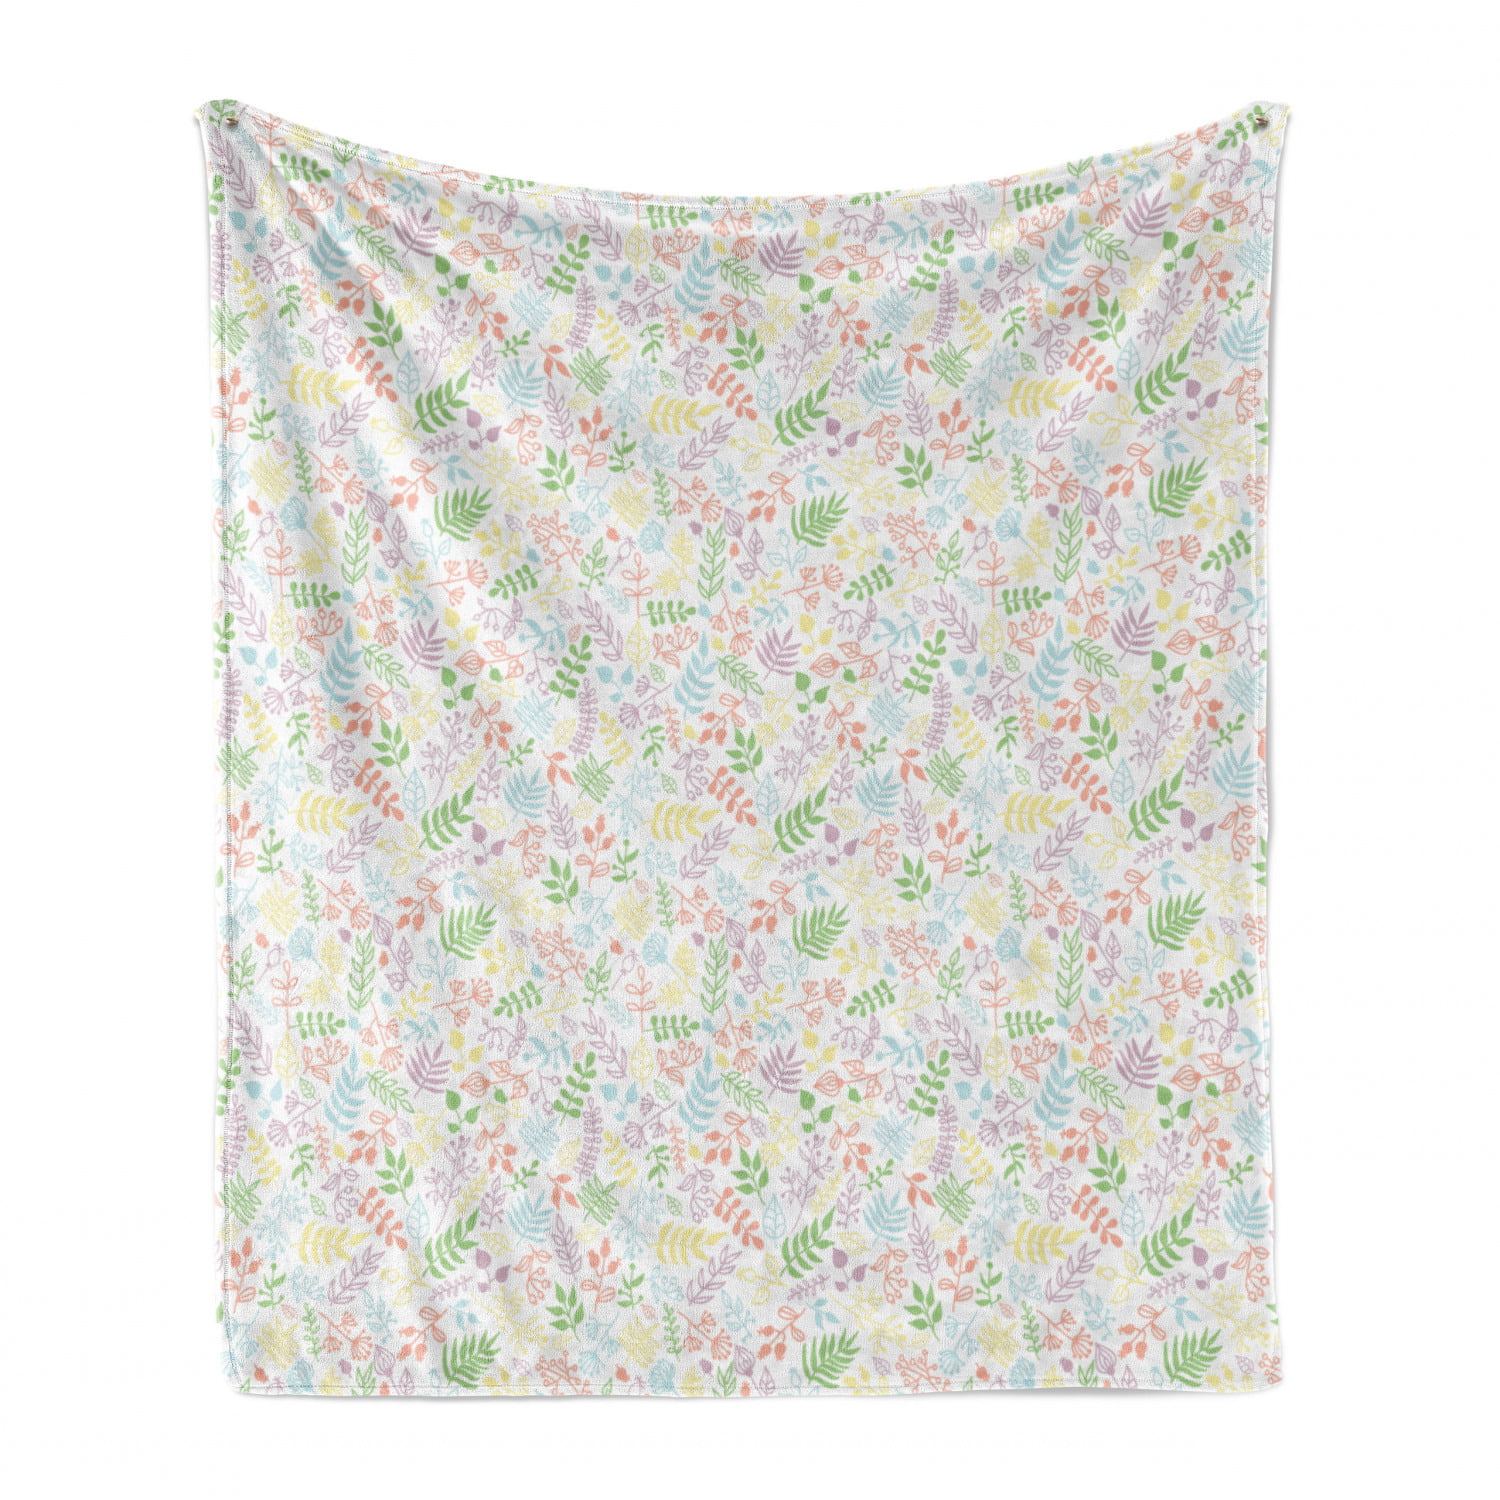 Cozy Plush for Indoor and Outdoor Use Ambesonne Floral Soft Flannel Fleece Throw Blanket Pale Rose White Repetitive Romantic Daisy Flowers Art in Pastel Tones Illustration 60 x 80 